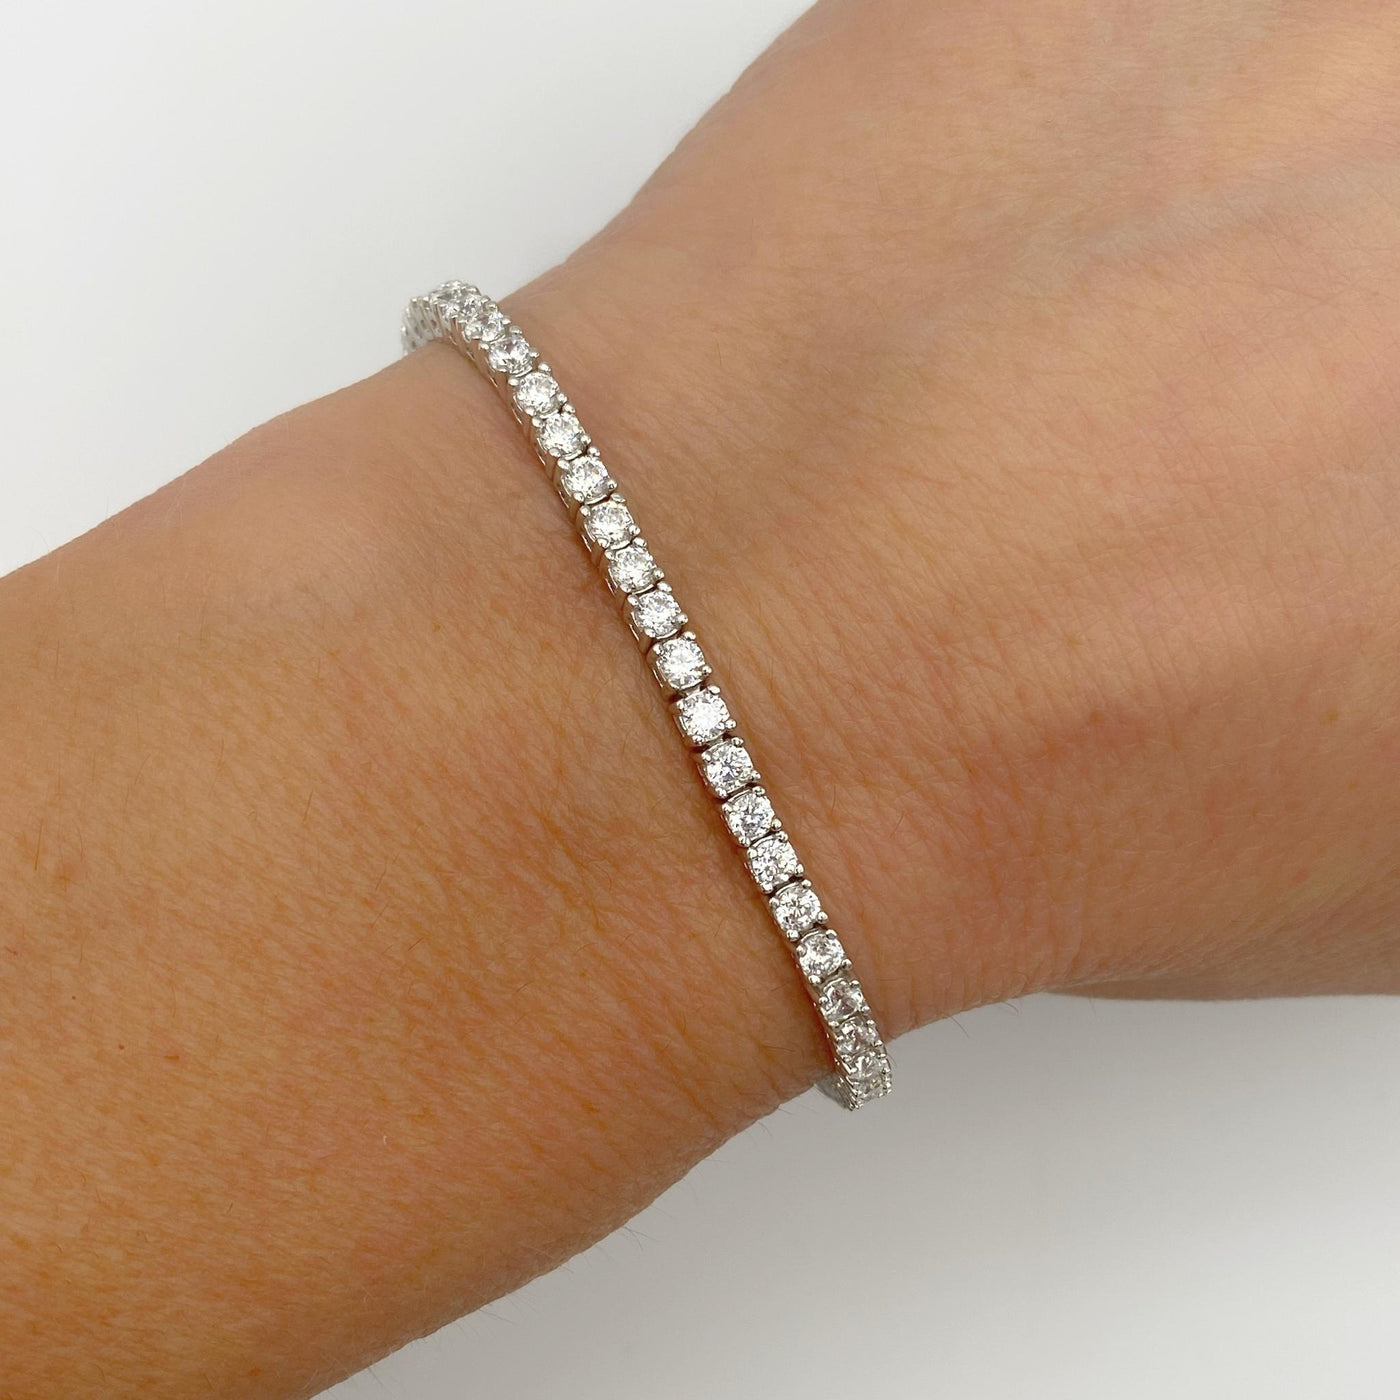 Silver casting tennis bracelet with white round stones - 2.5 mm